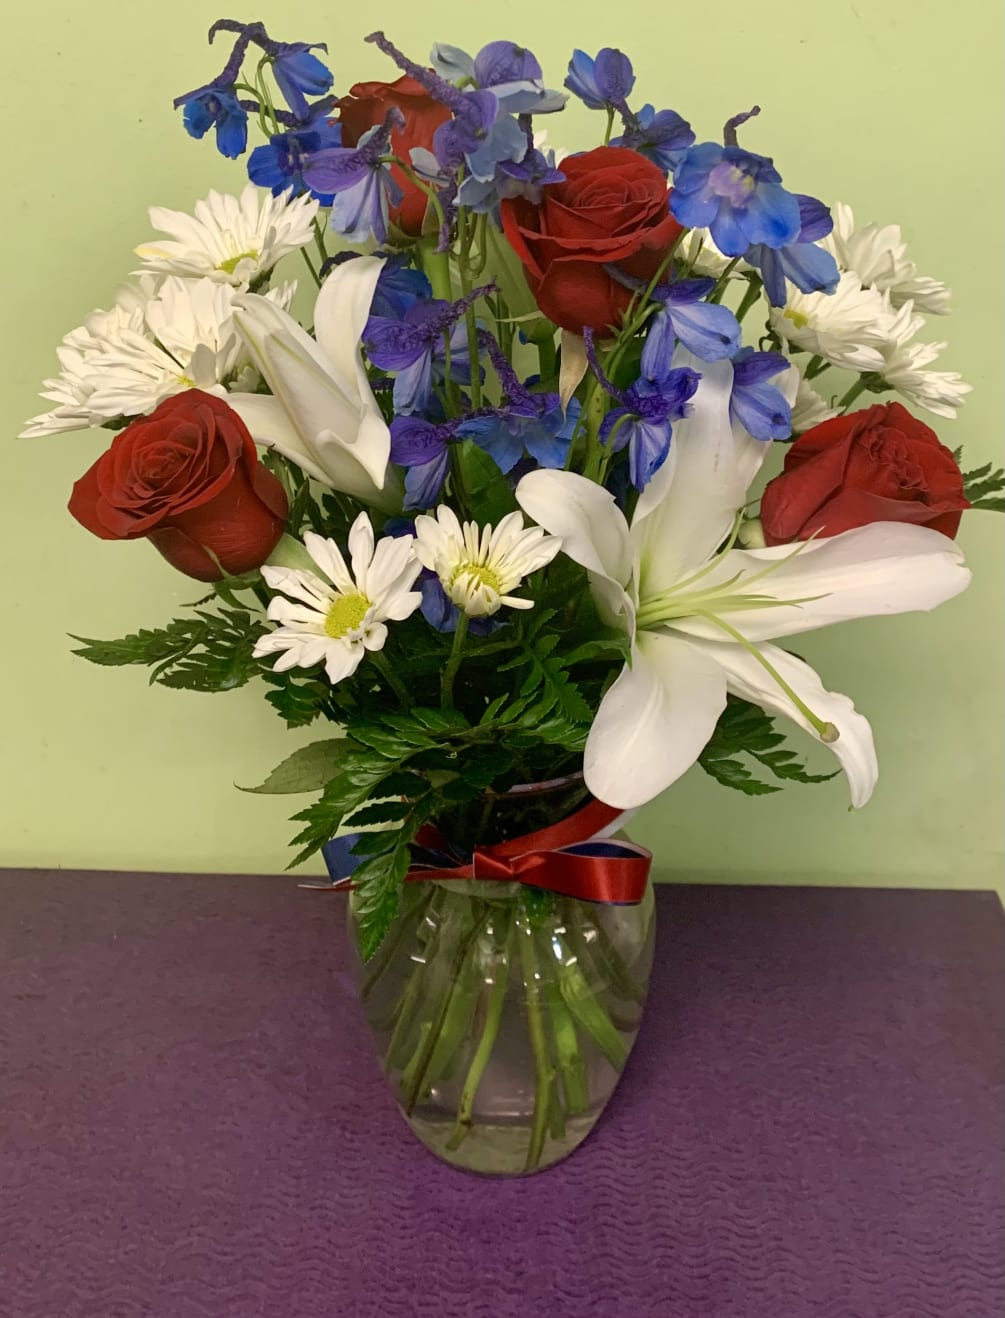 This arrangement includes white Hybrid Liles, red Roses, blue Delphinium, and white